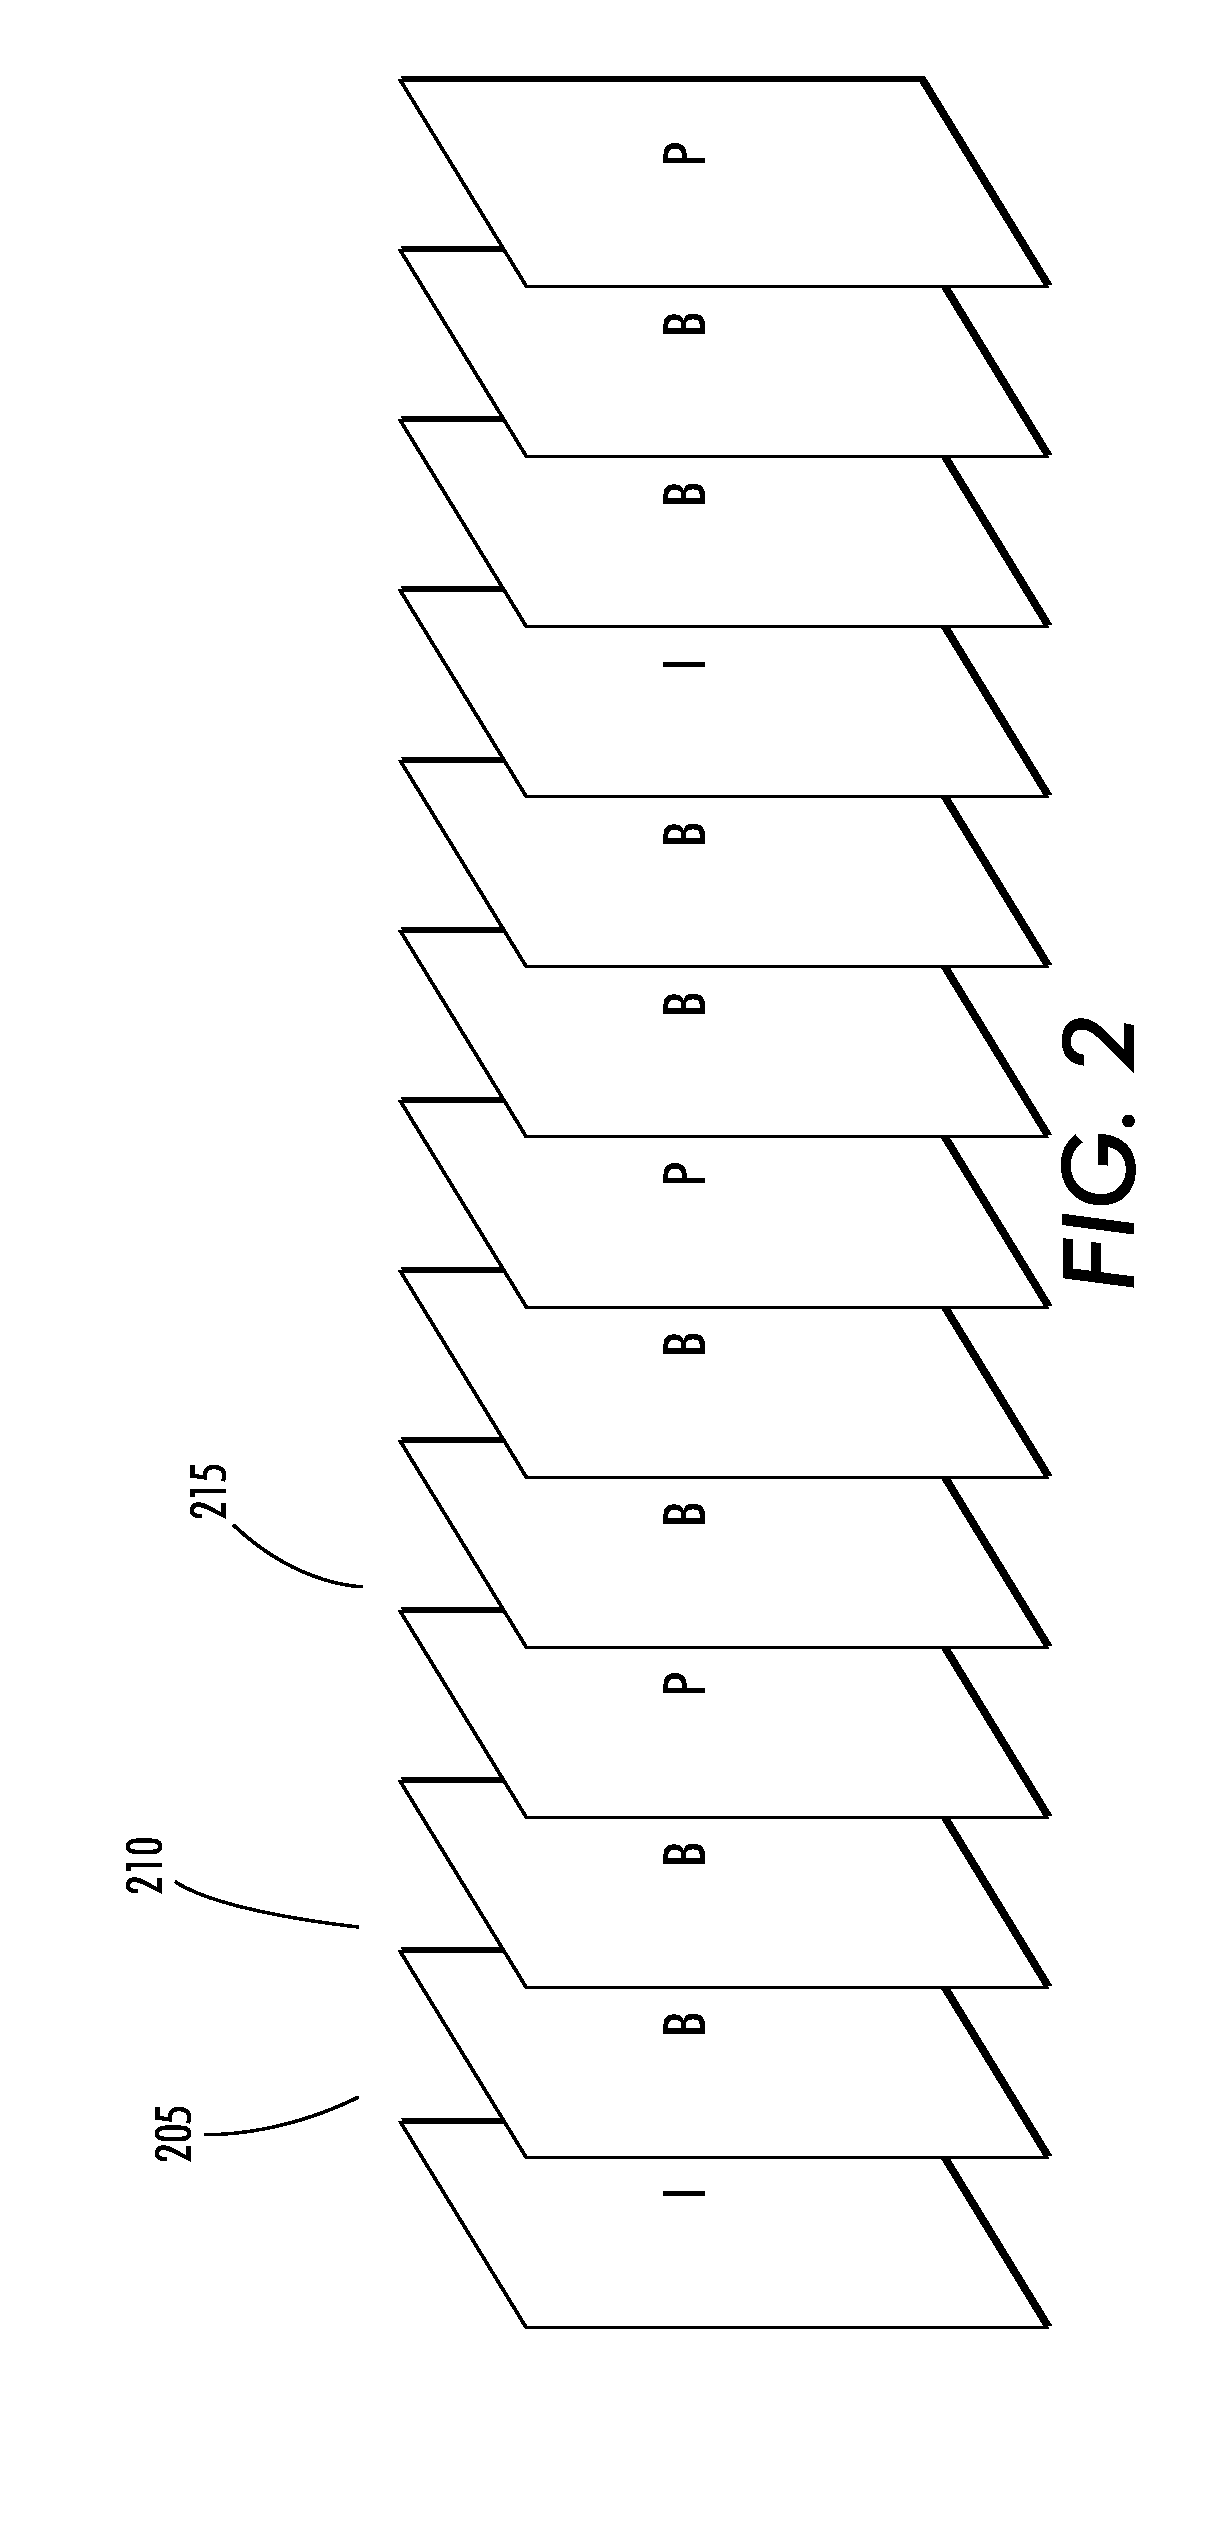 Vehicle counting methods and systems utilizing compressed video streams